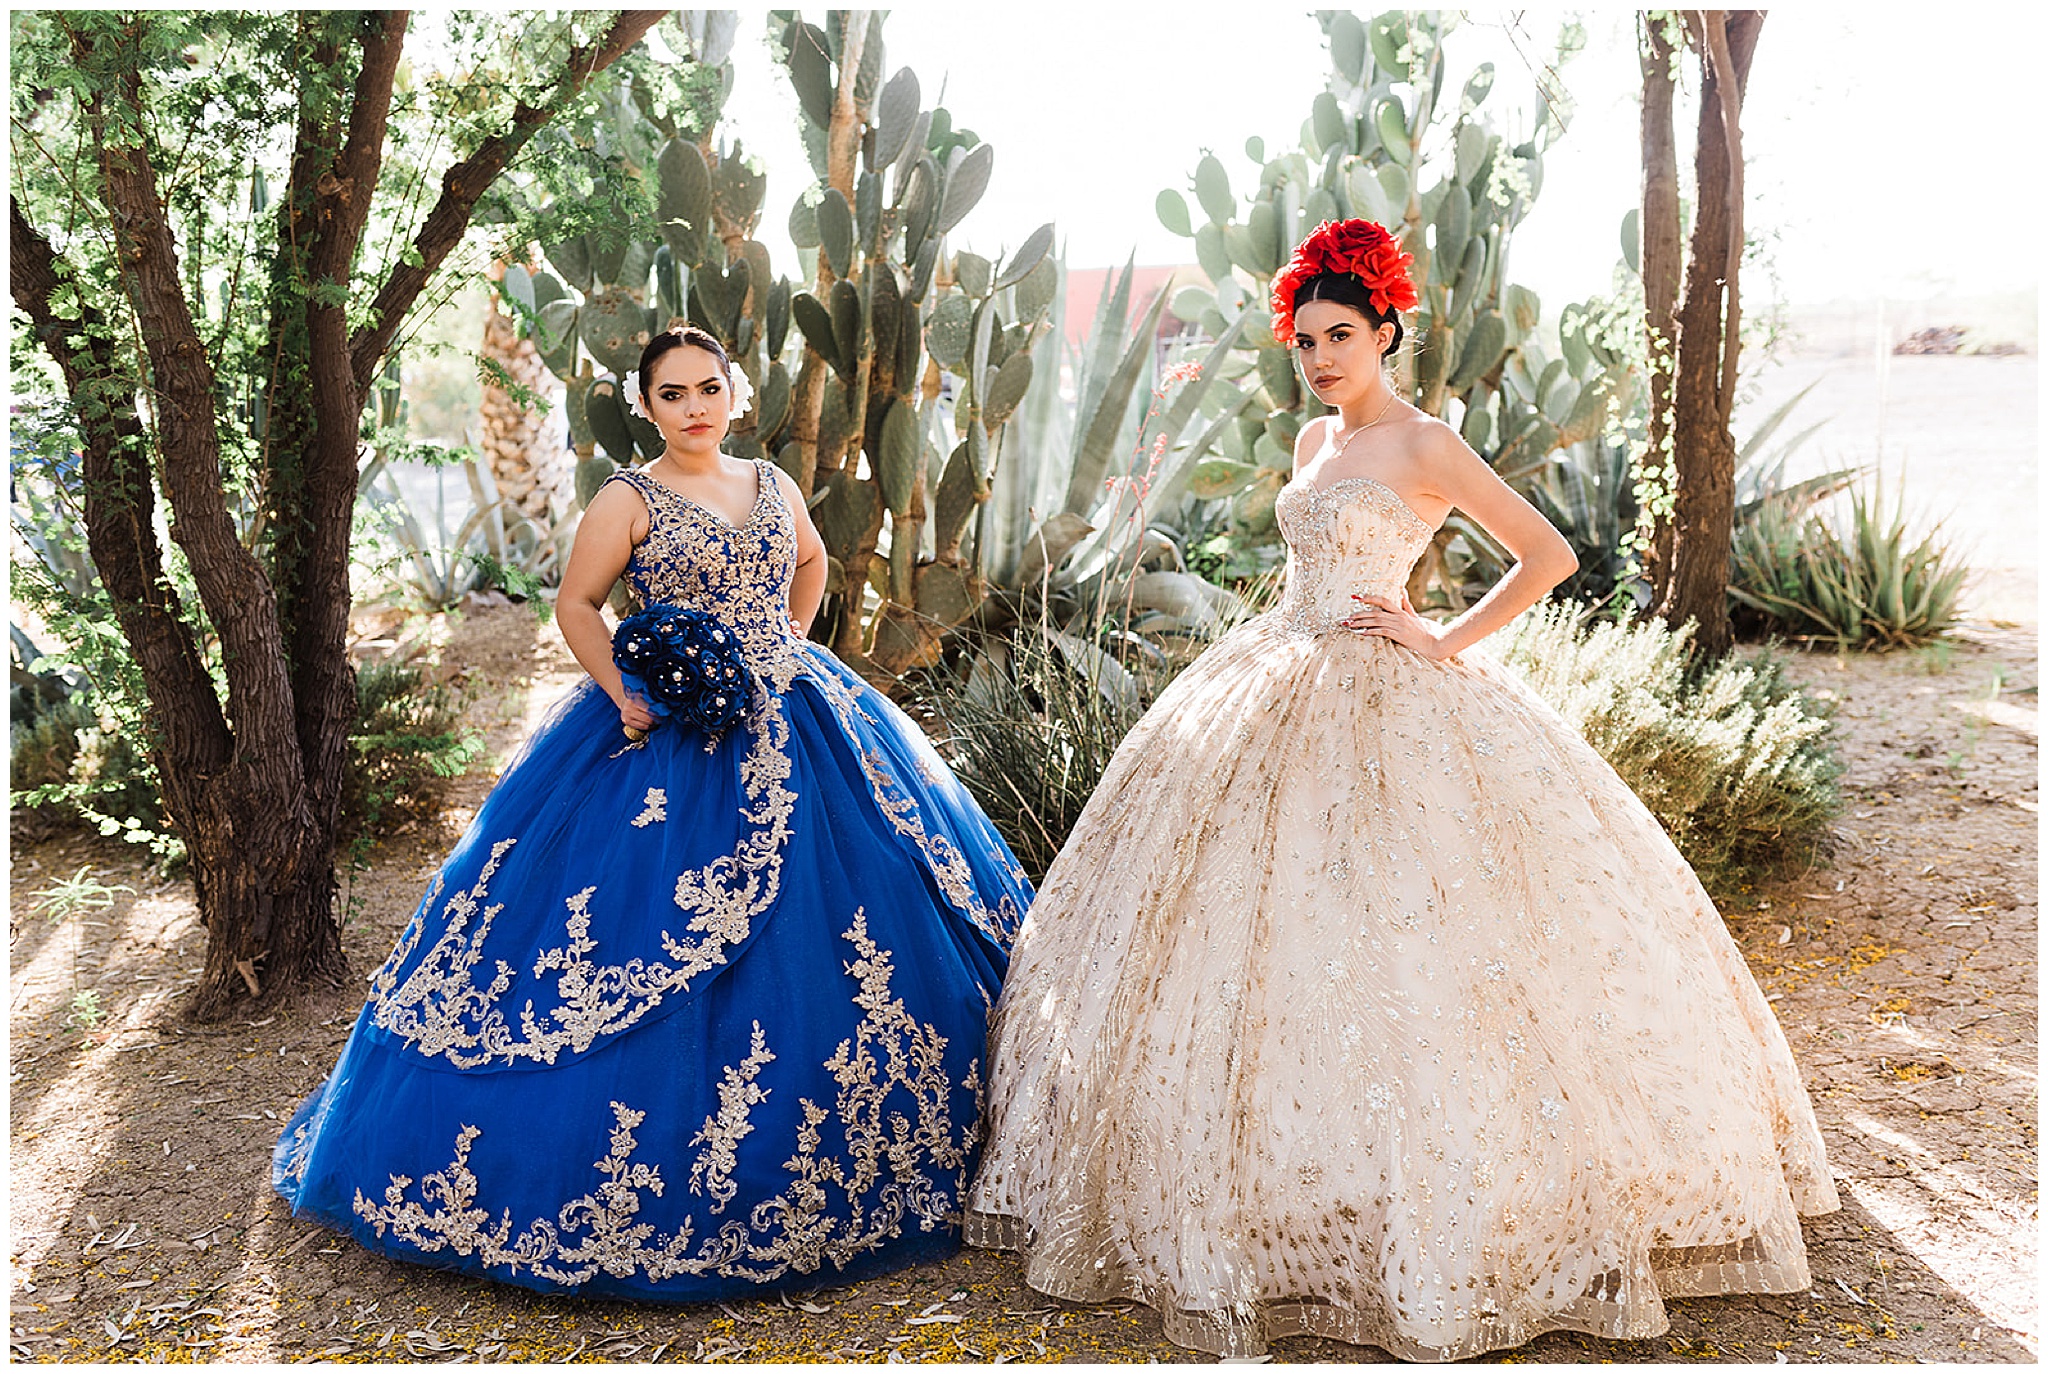 Teenagers stand in a desert garden in ornate blue and gold ball gowns Phoenix Quinceaneras dresses